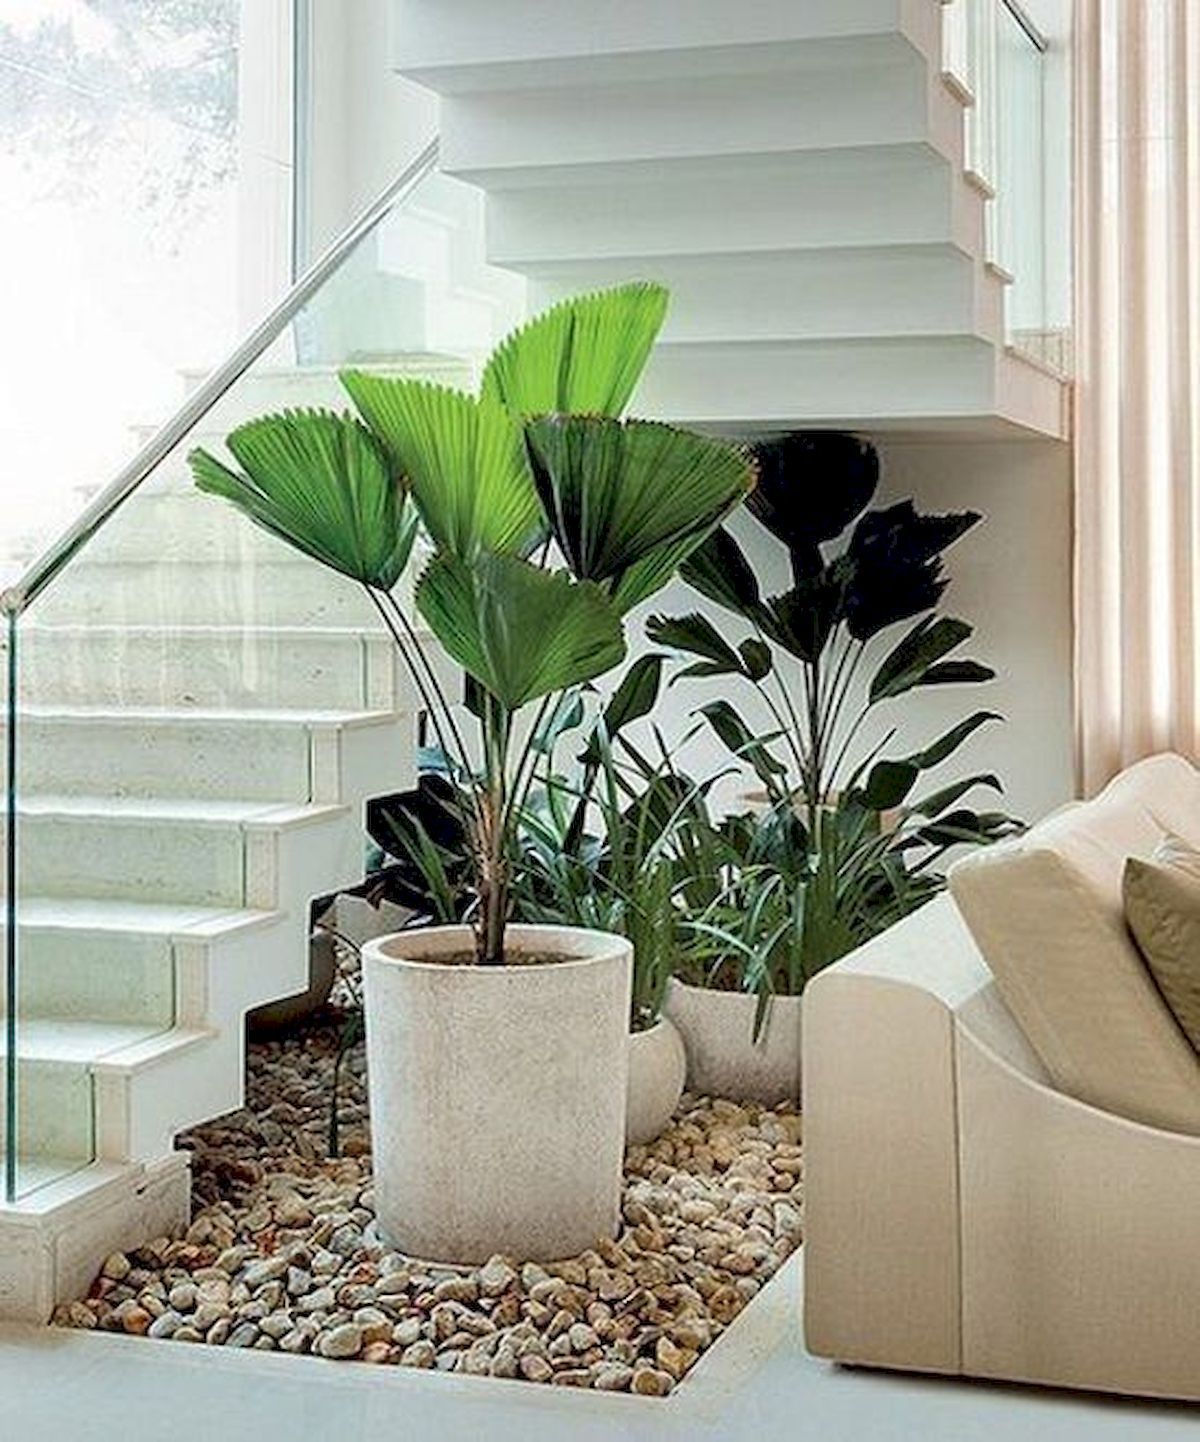 Indoor Garden Office and Office Plants Design Ideas For Summer -   13 office planting ideas